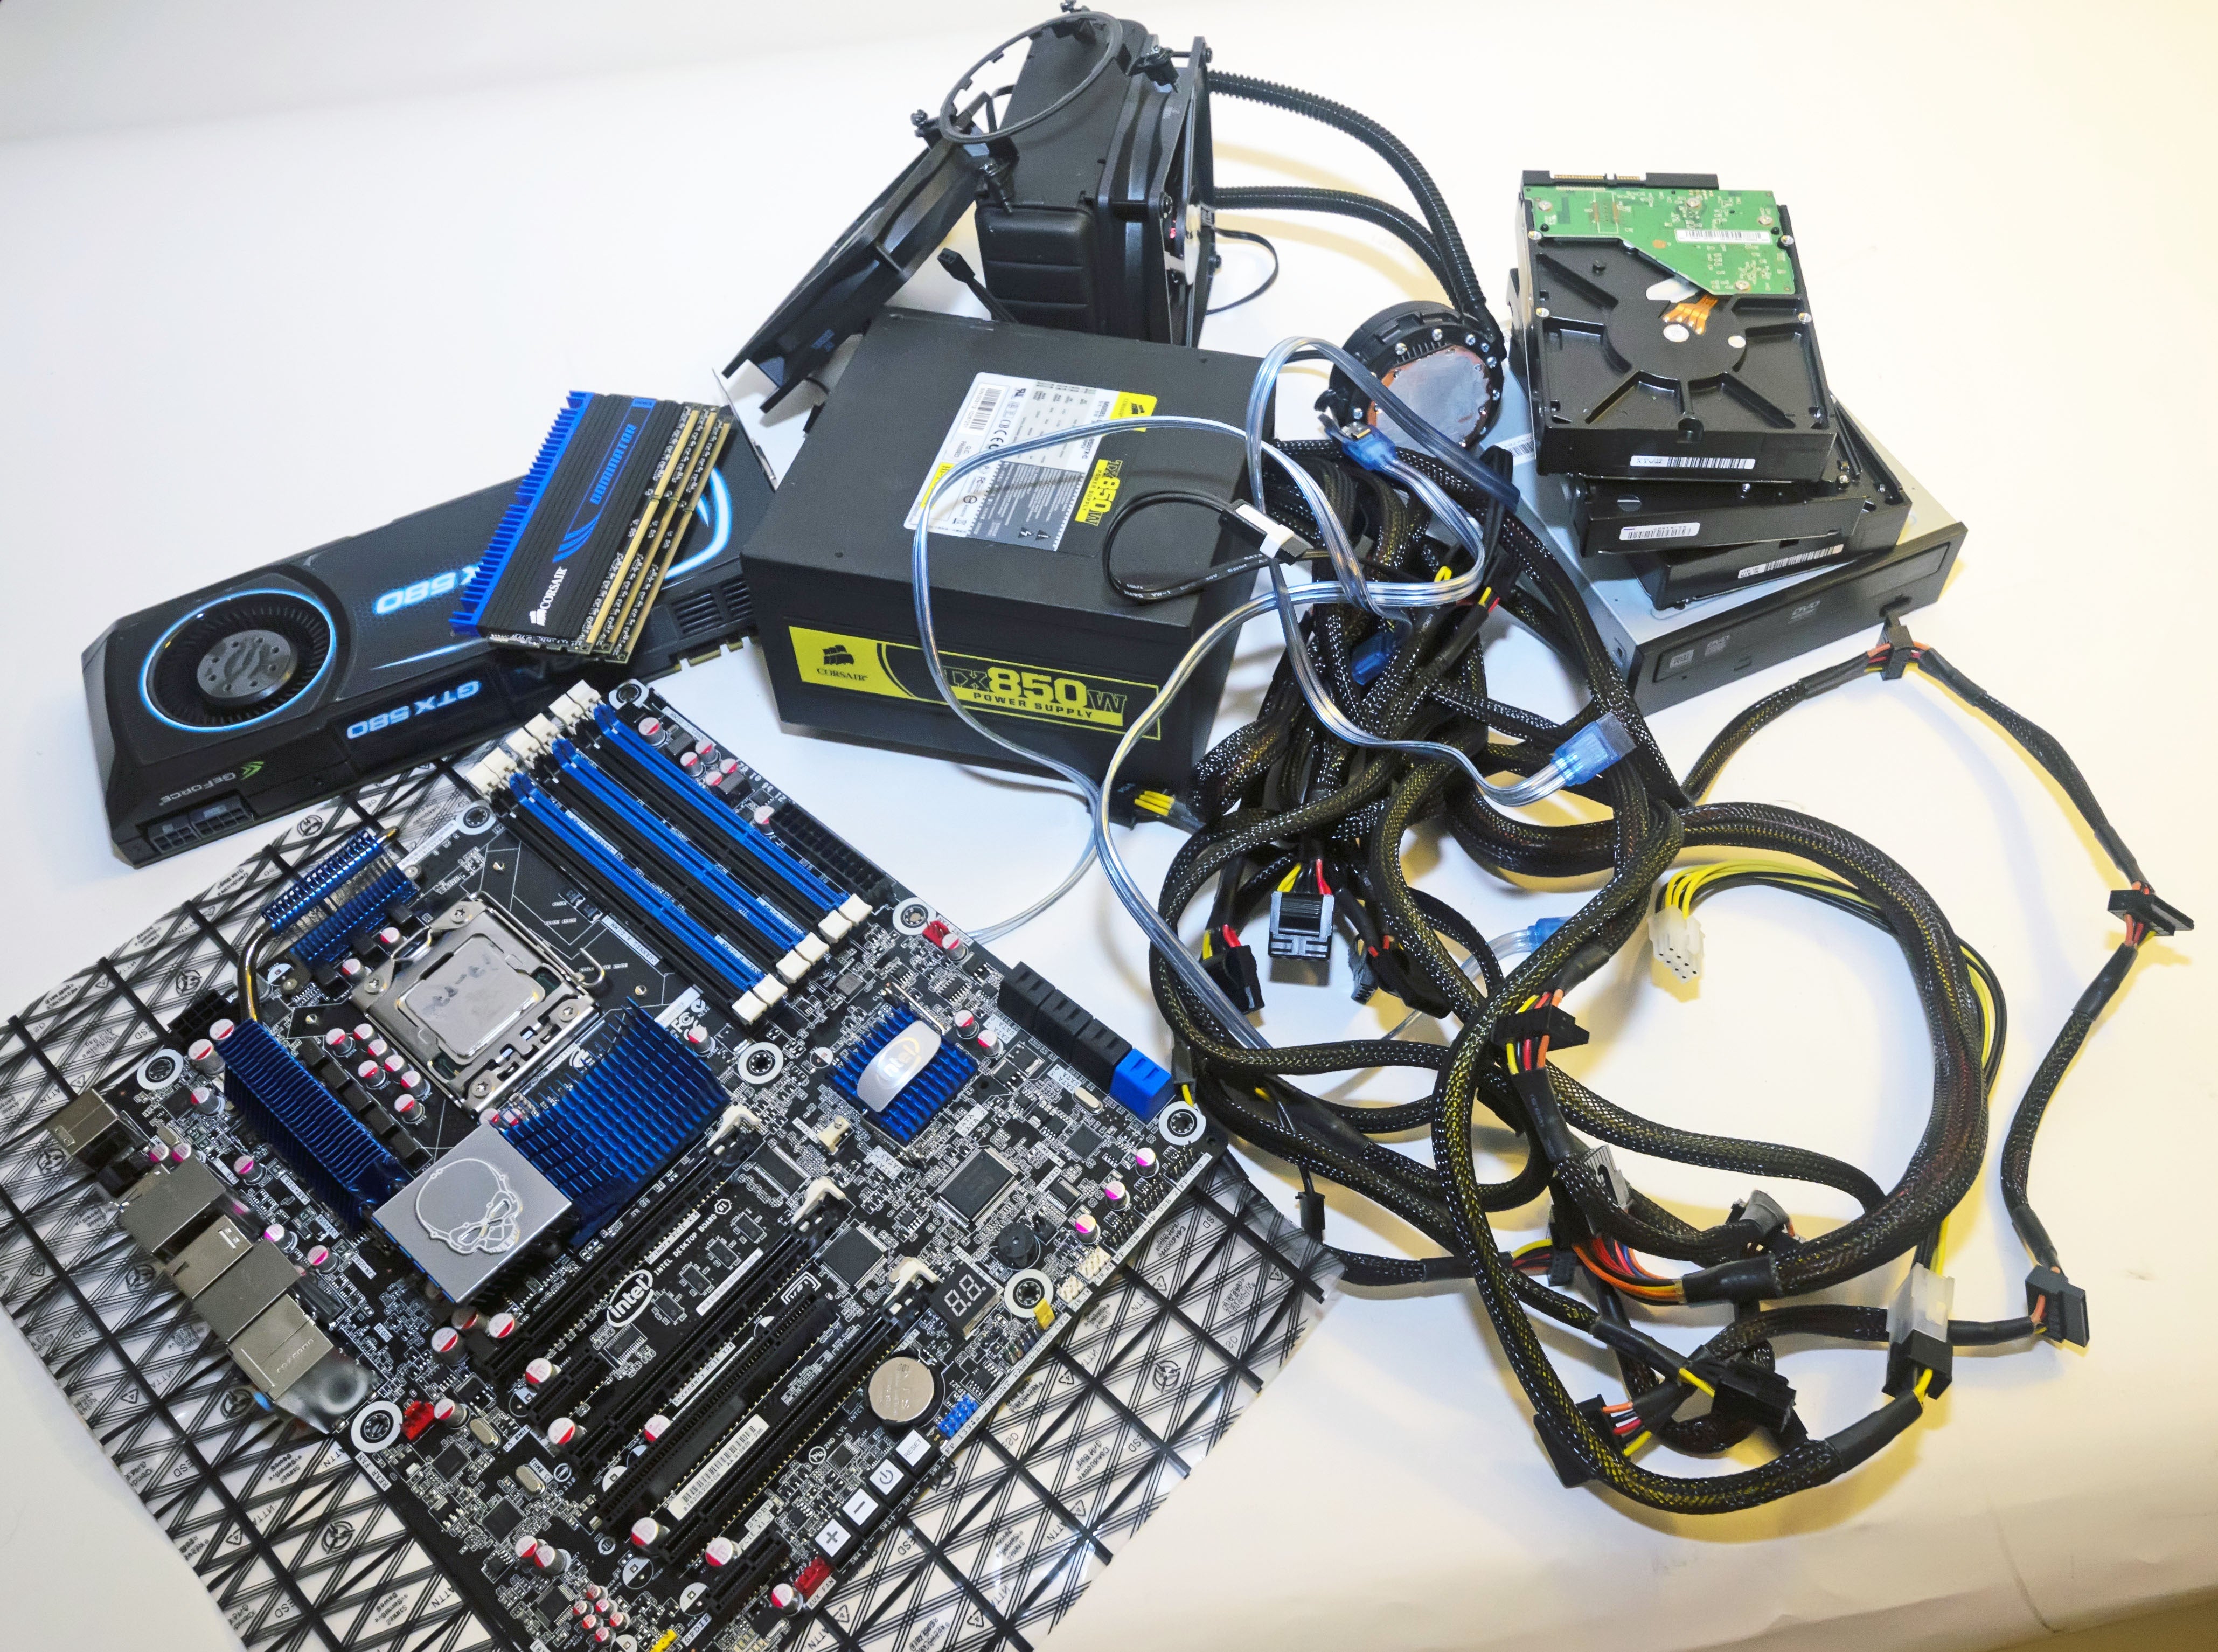 https://images.techhive.com/images/article/2014/04/messy20pile-5246771-100262290-orig.jpg